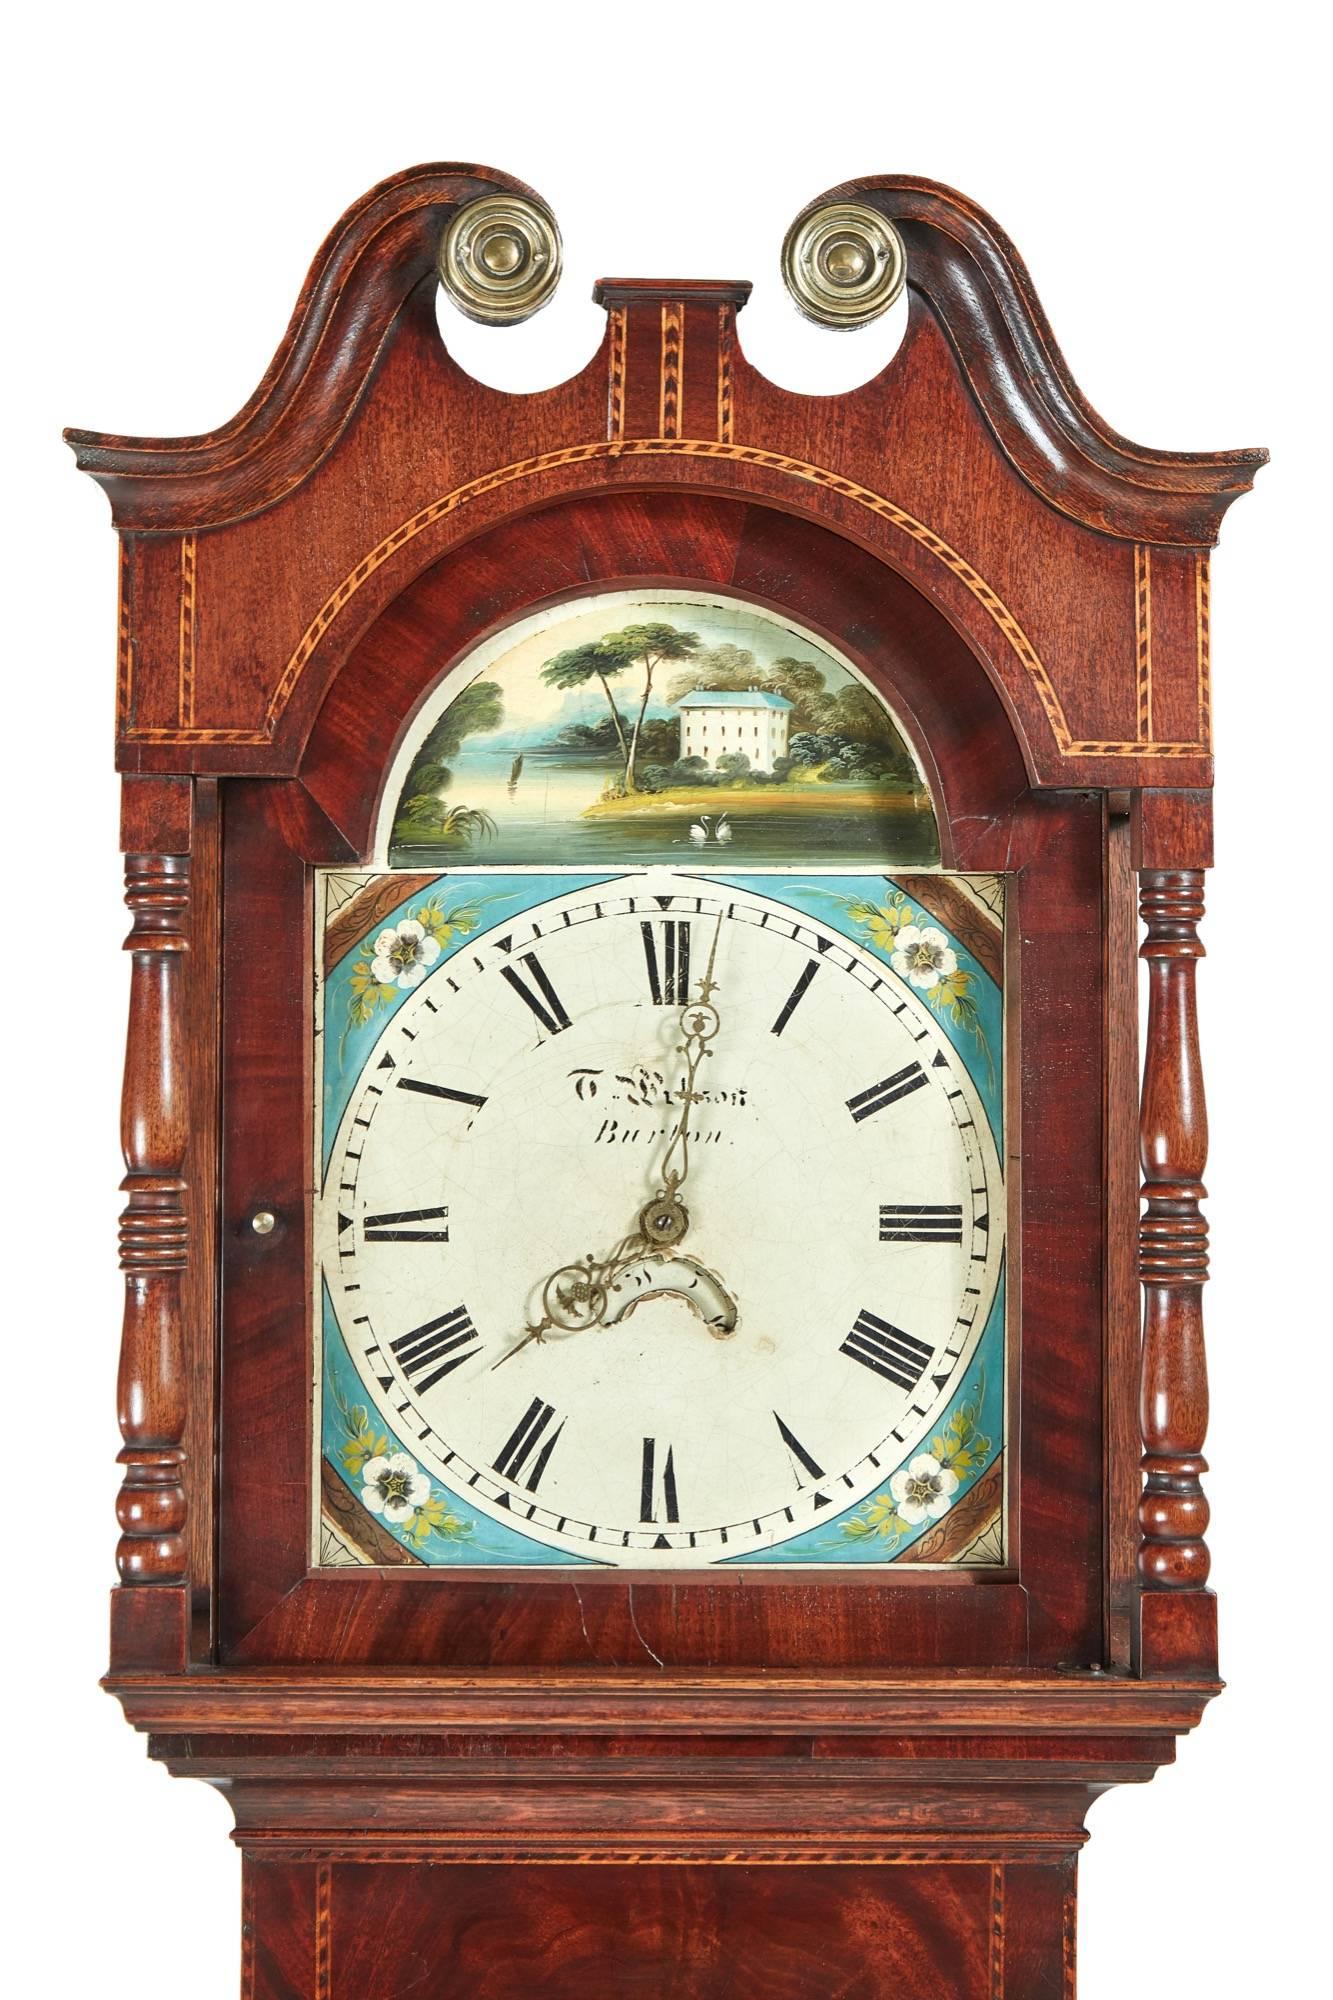 George III oak and mahogany grandfather clock, with a swan-neck pediment, lovely inlaid case, 30 hour movement, lovely decorative arched painted dial, working order, all original
Lovely color and condition
Measures: 18